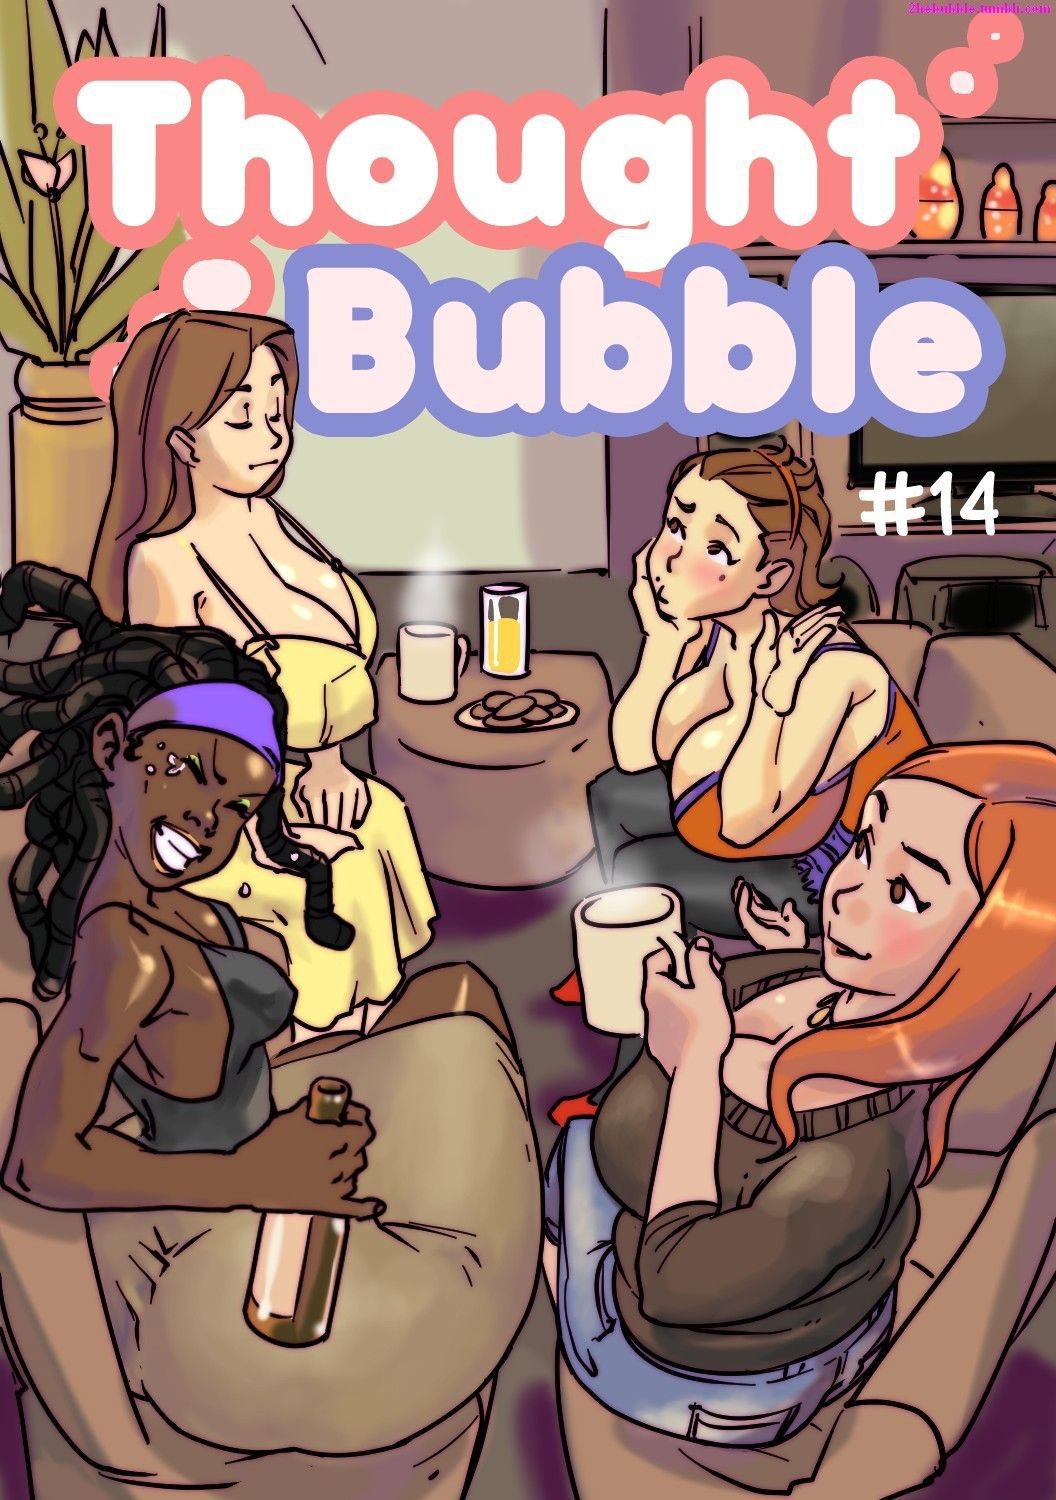 Pussy Lick [Sidneymt] Thought Bubble #14-15-16 [Ongoing] Hardcore Porn Free